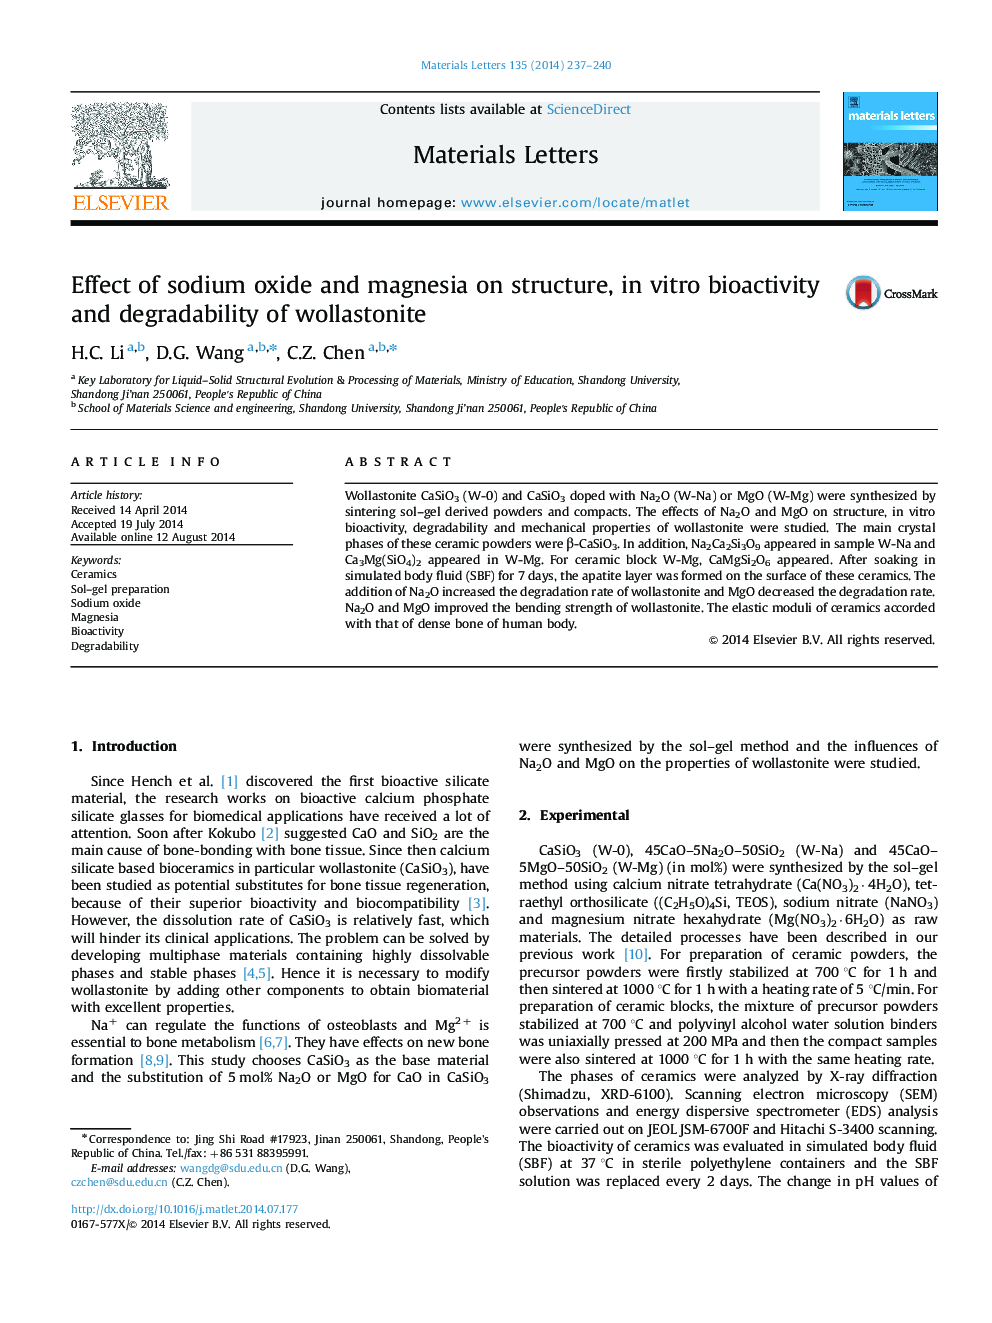 Effect of sodium oxide and magnesia on structure, in vitro bioactivity and degradability of wollastonite